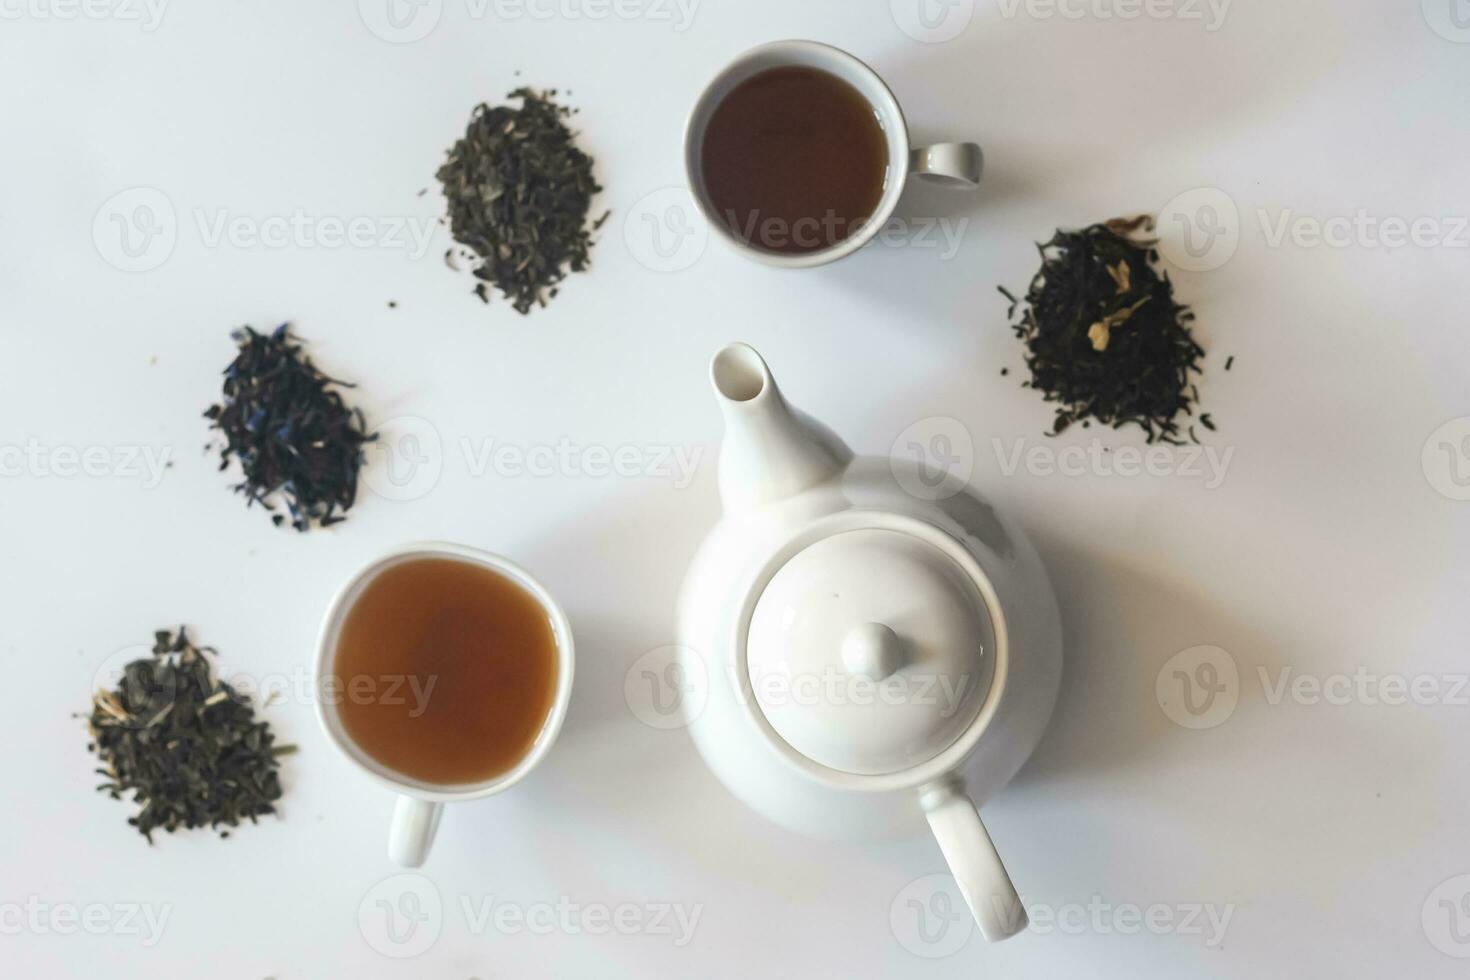 Tea set with white ceramic tea pot and other tea ingredients on the white. Flat lay view of various dried teas and teapot. View from above. Space for your text photo